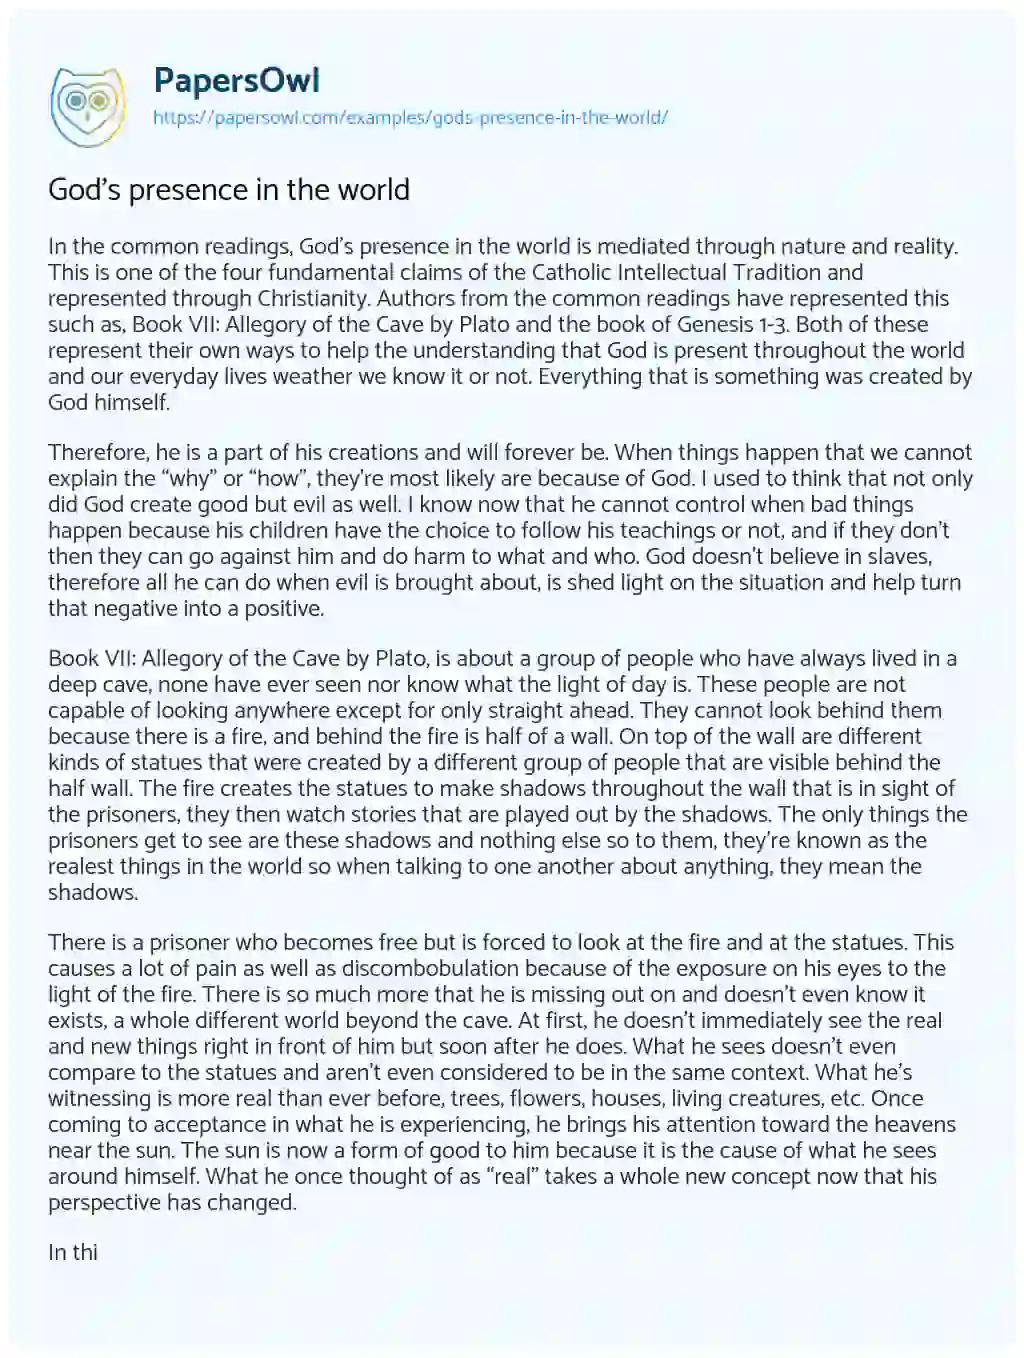 Essay on God’s Presence in the World